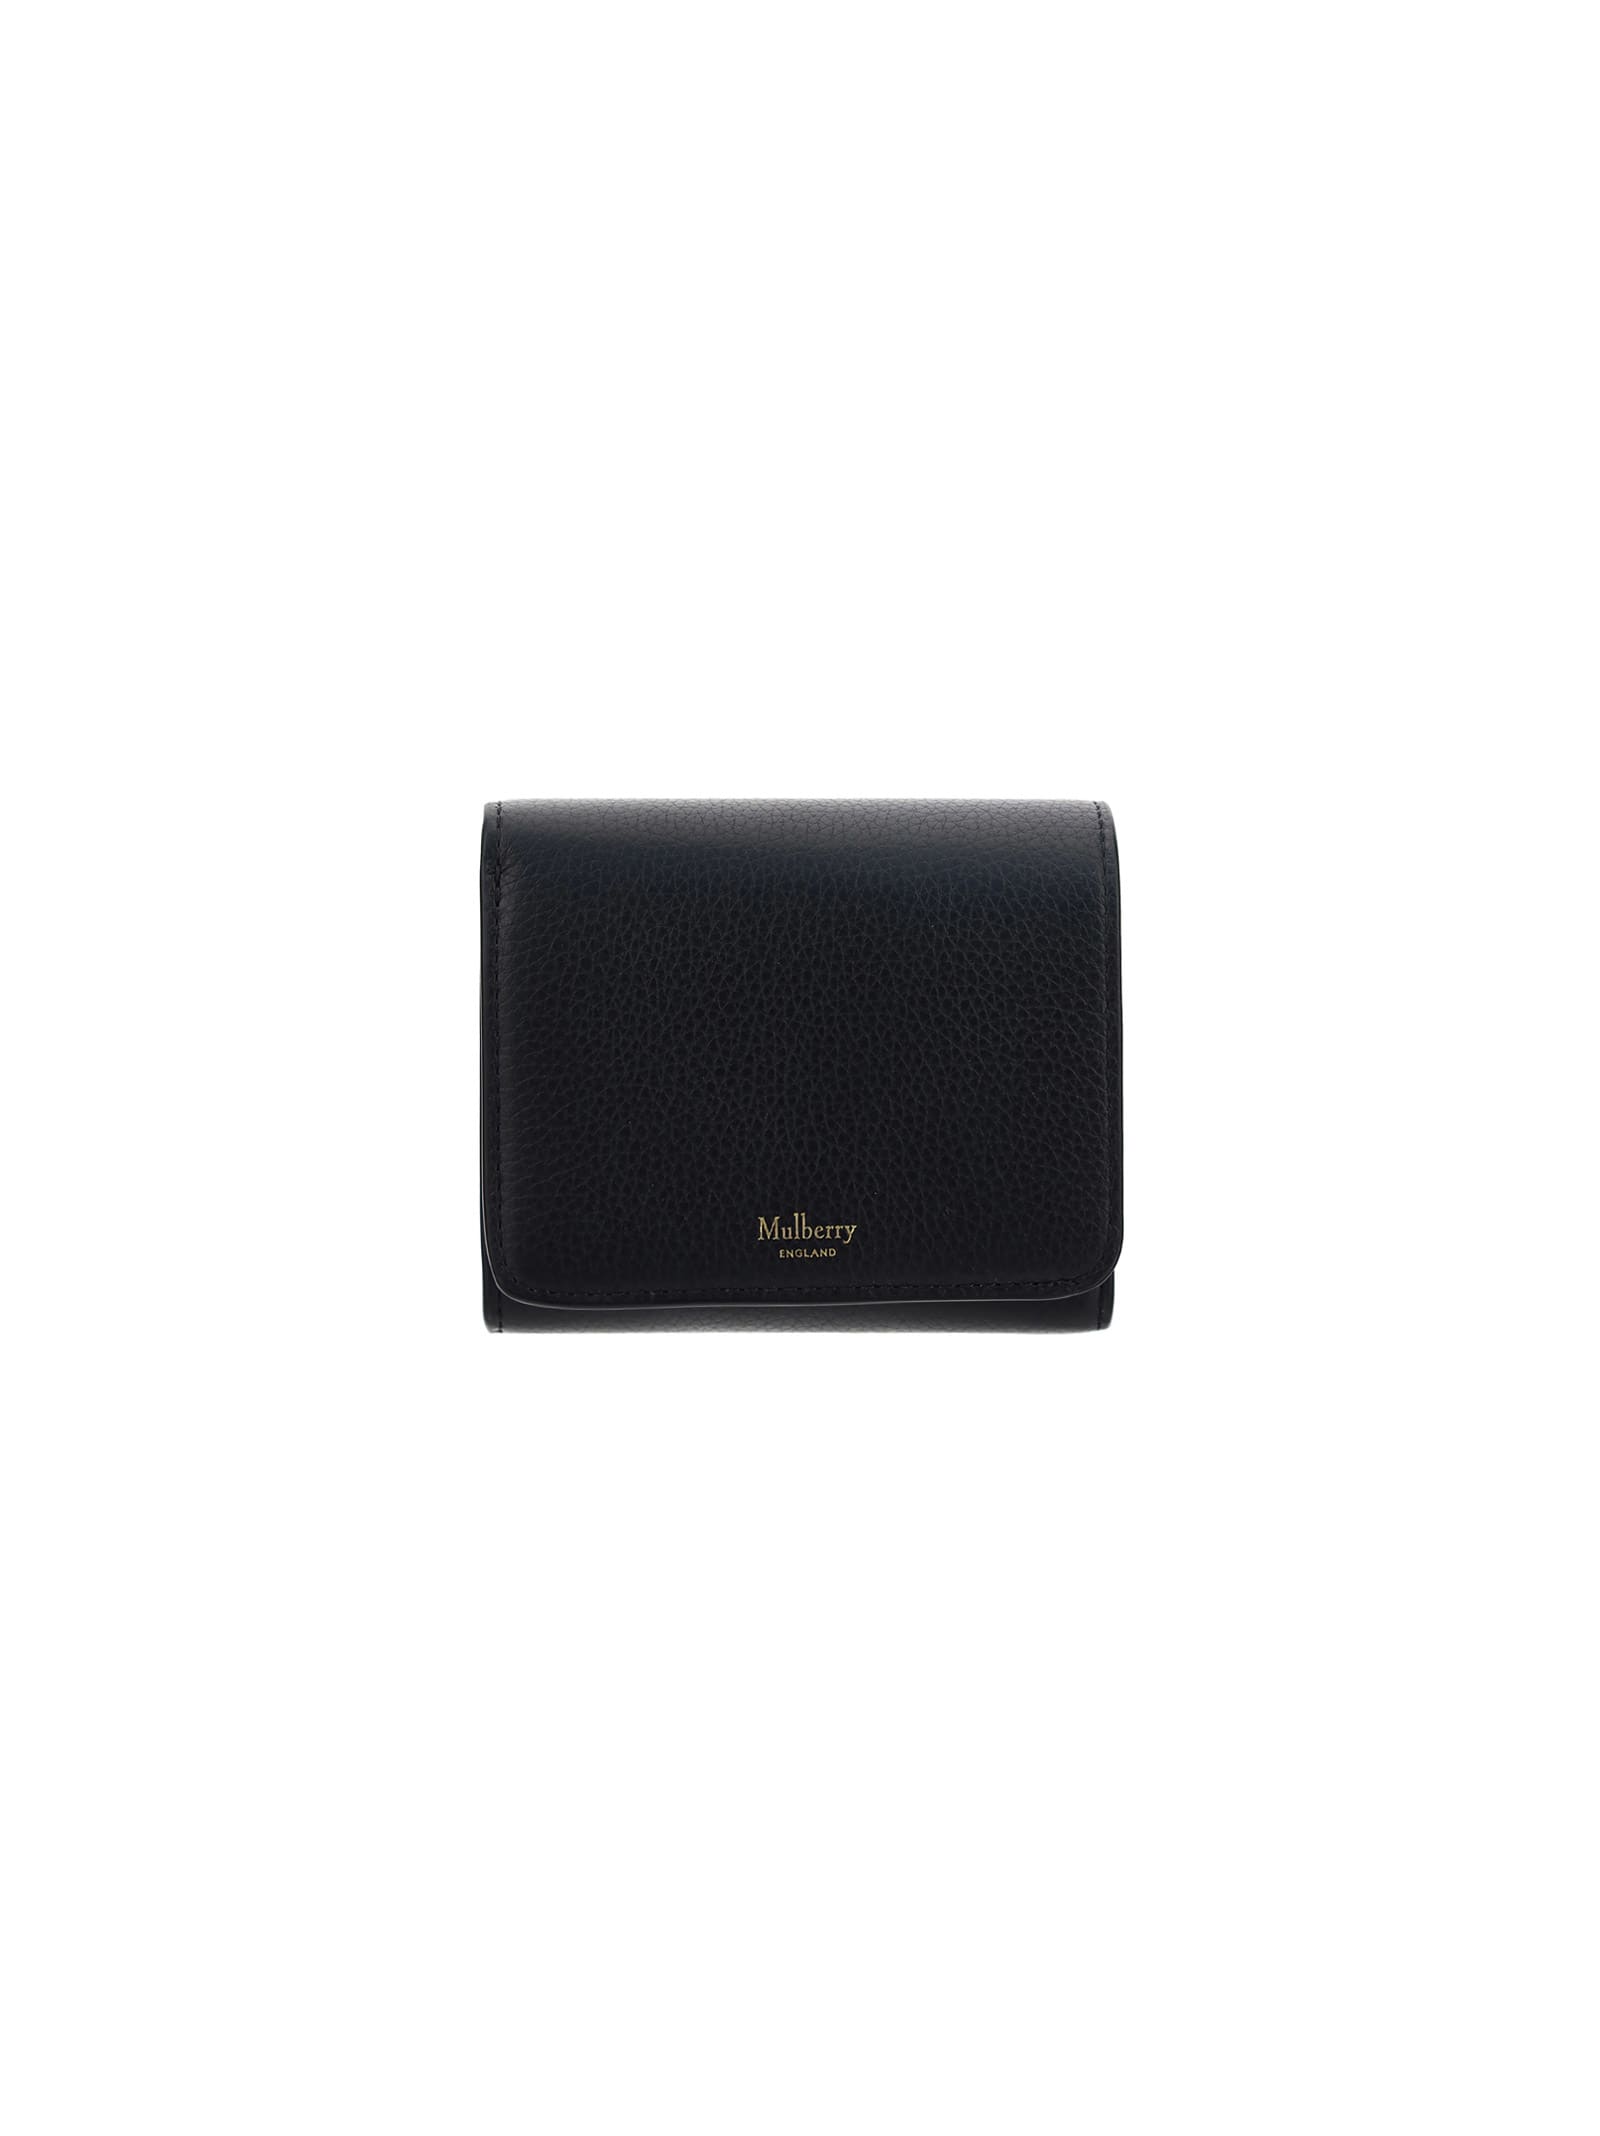 Mulberry Small Continental Purse